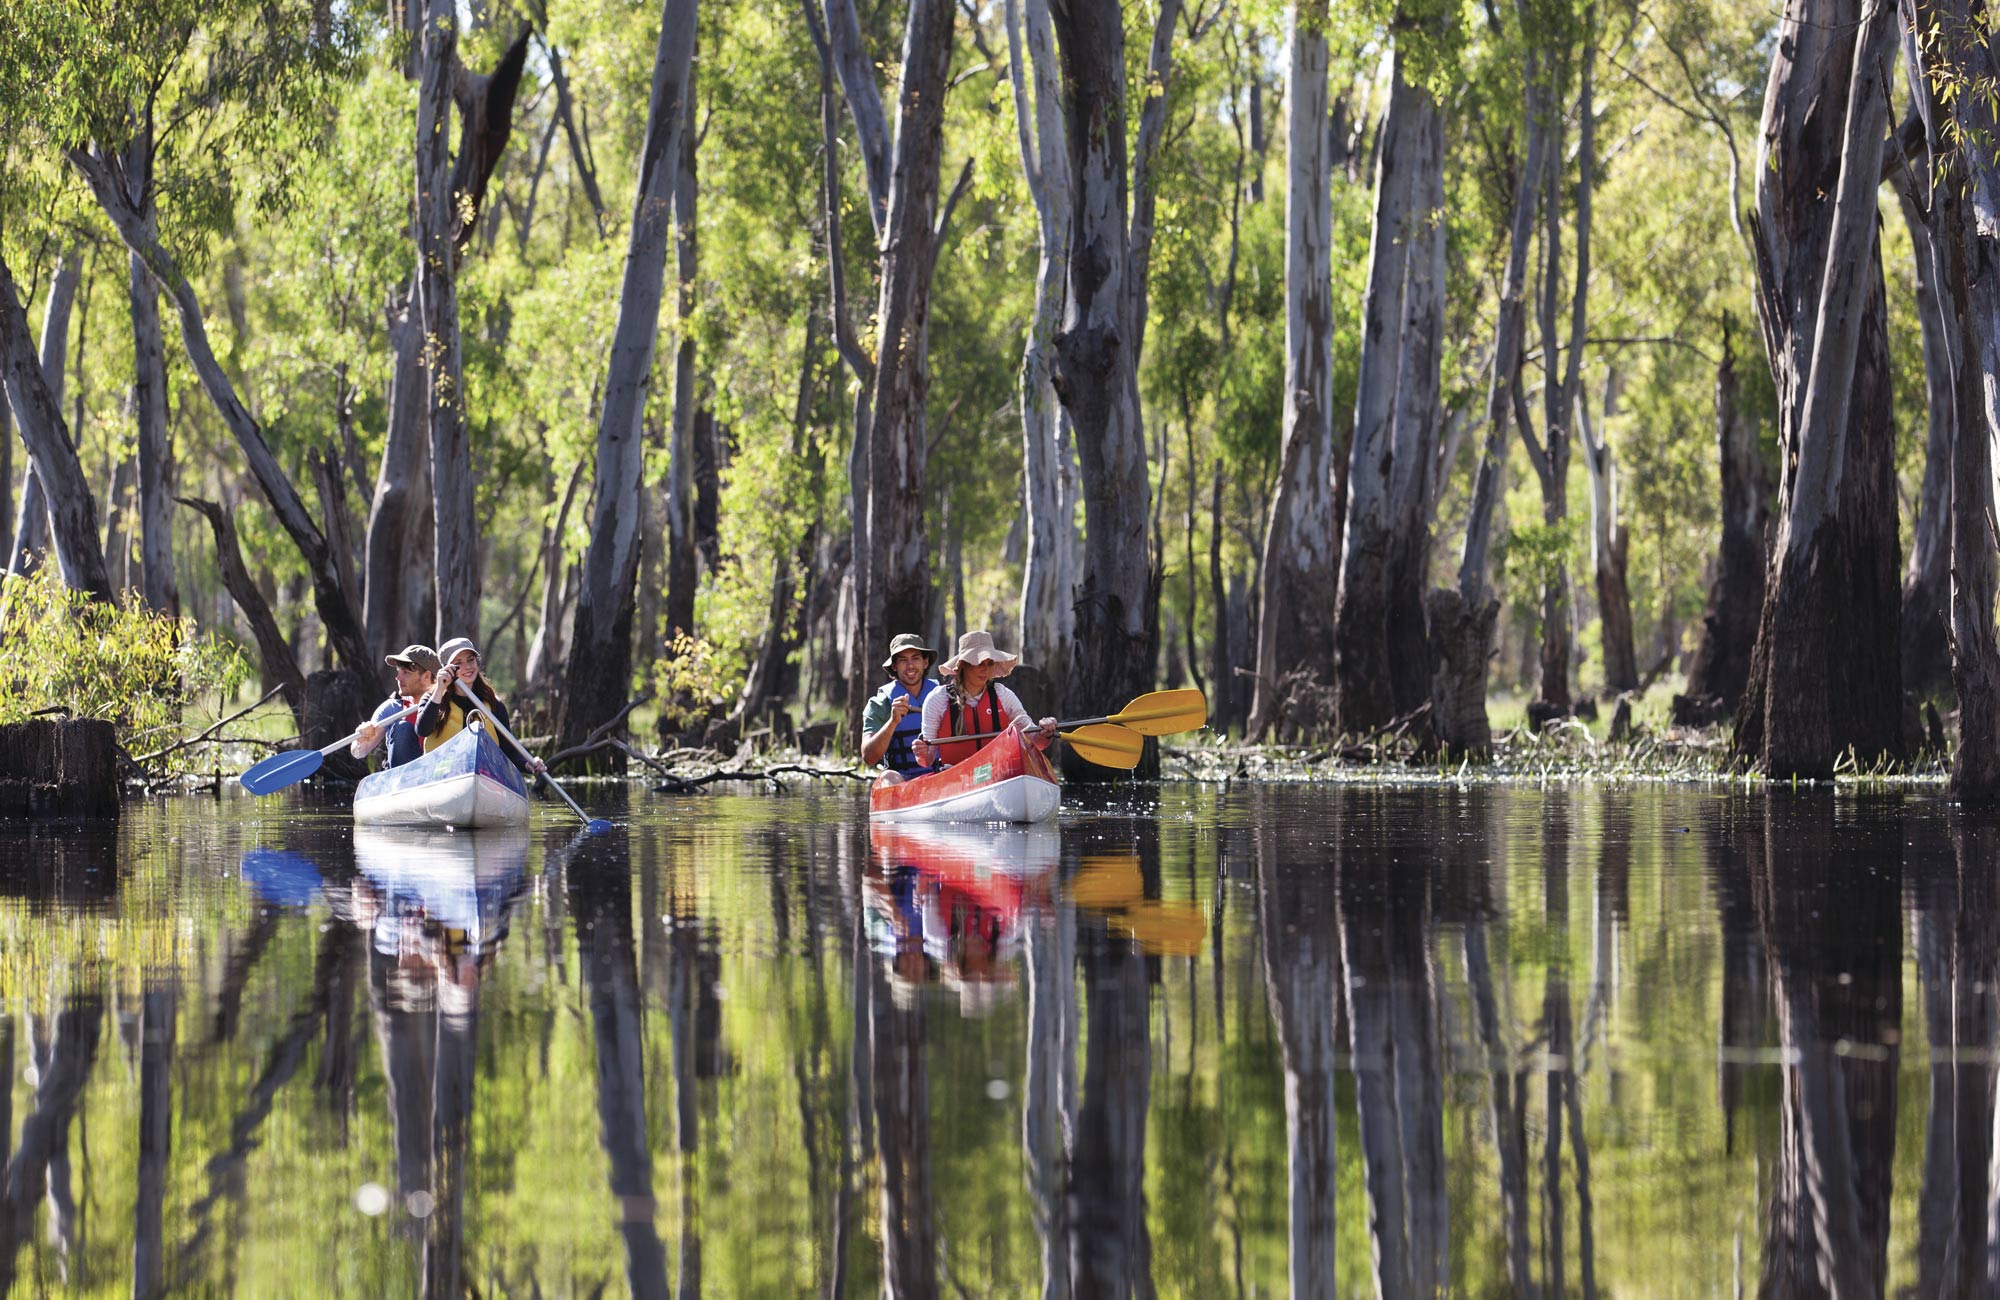 Kayaking amongst the river red gums.